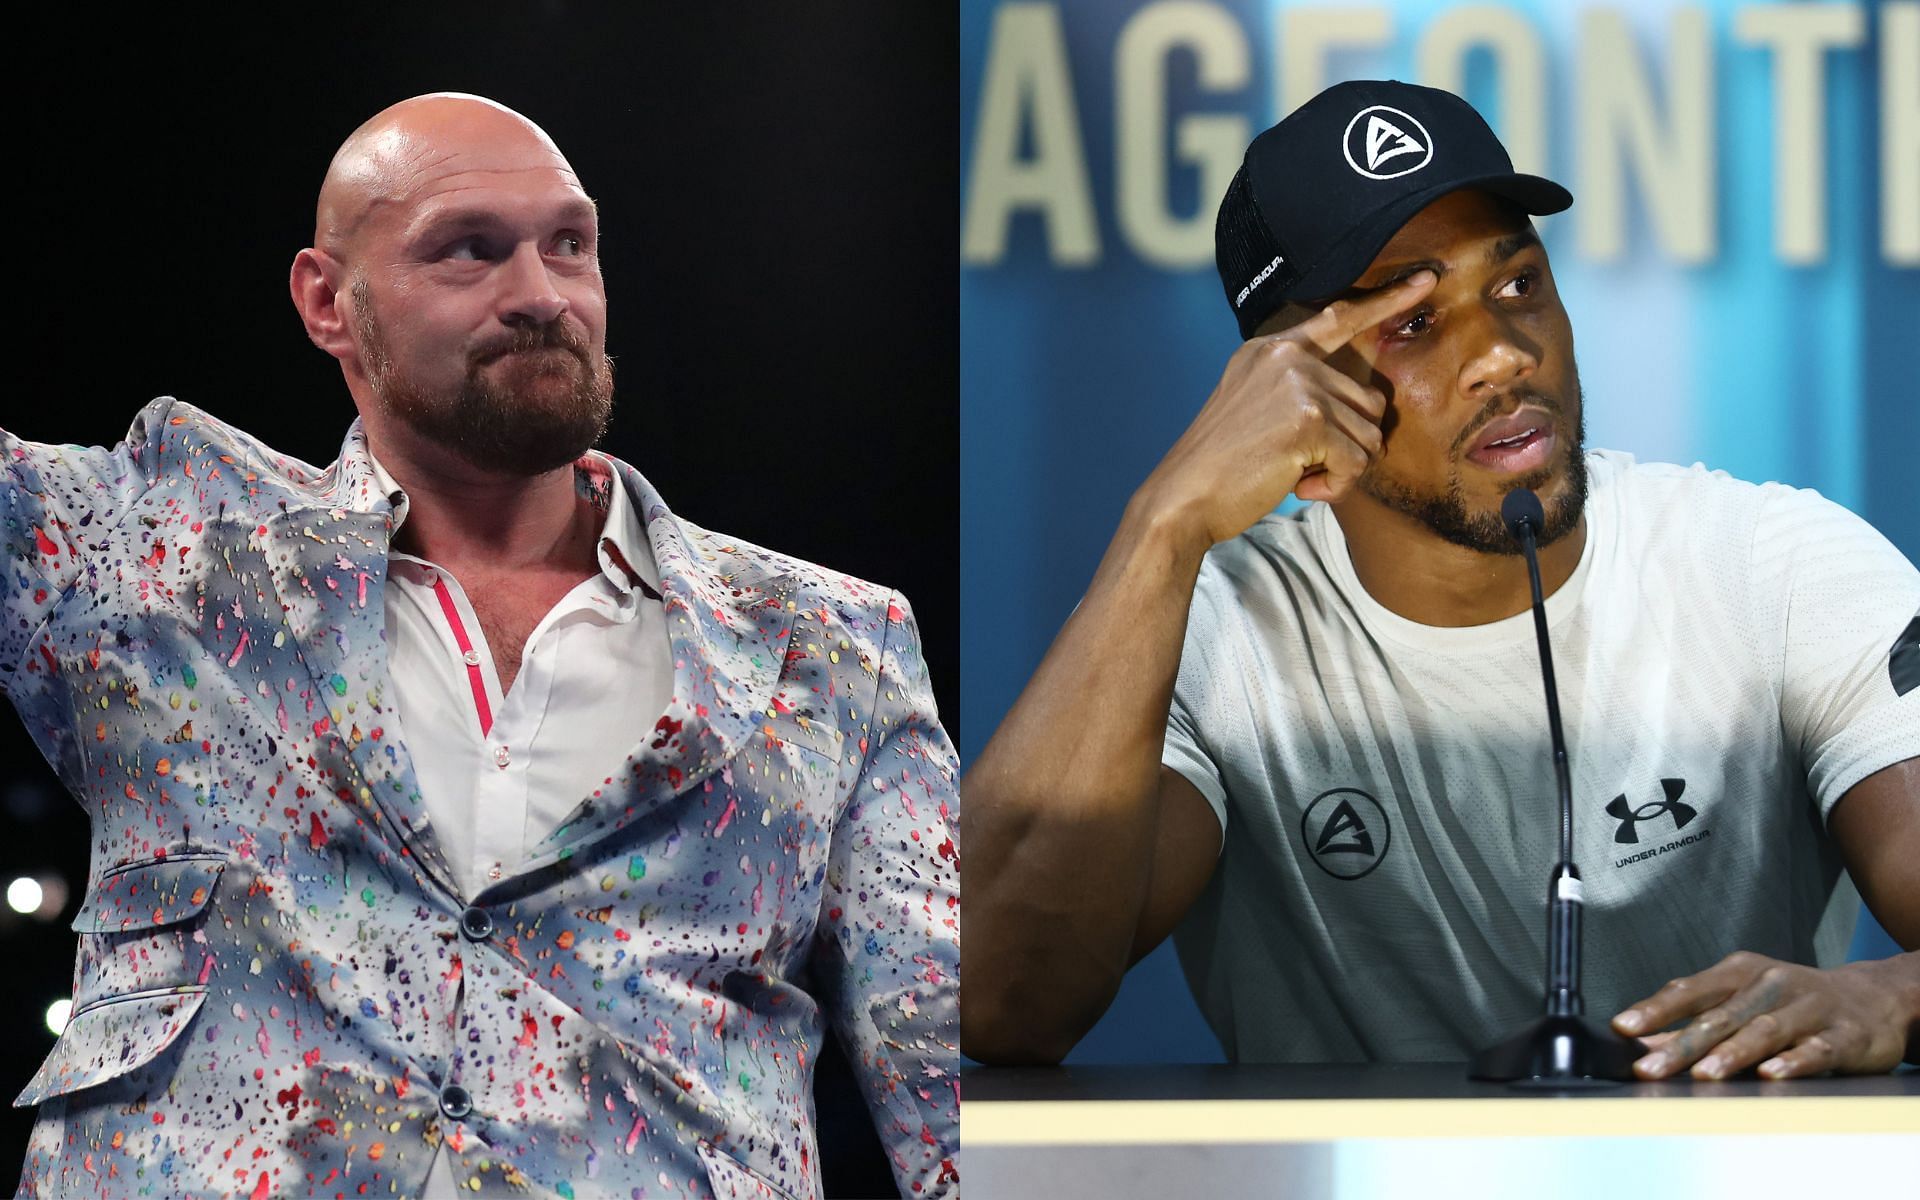 Tyson Fury (left) and Anthony Joshua (right) (Image credits Getty Images)